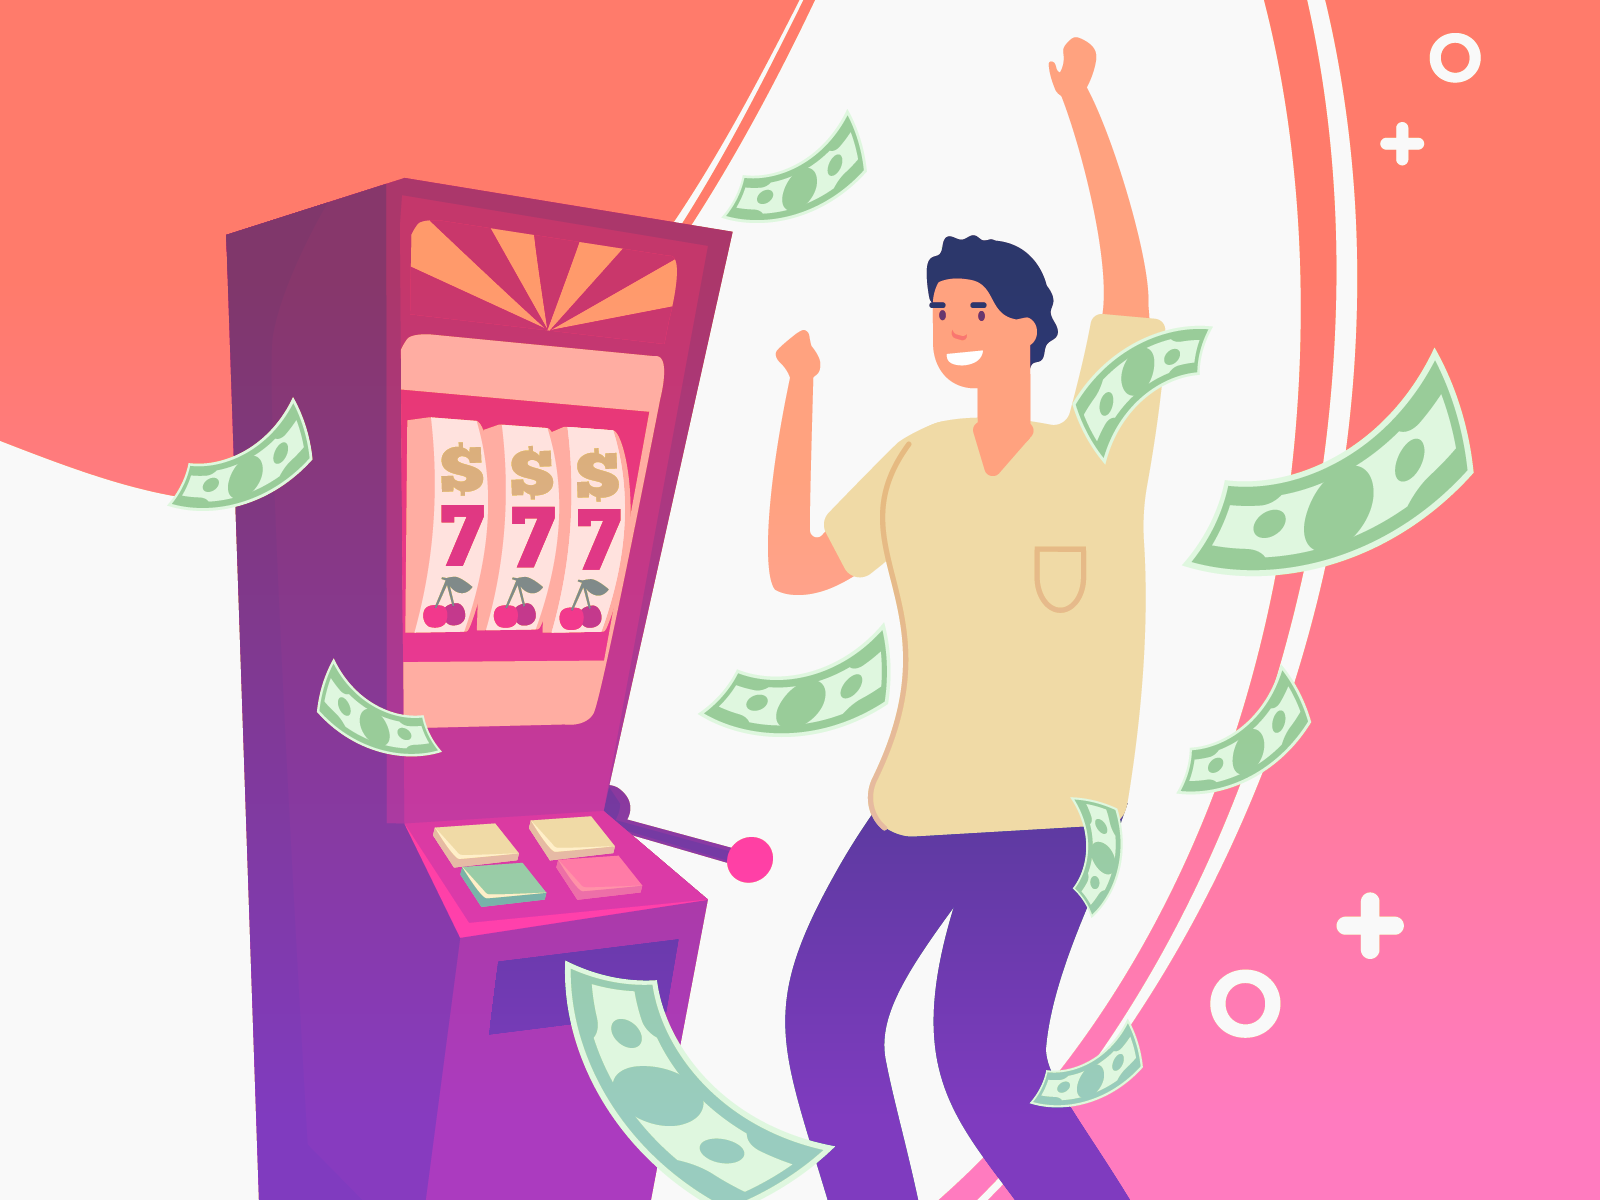 Slot Machines With the Best Odds of Winning